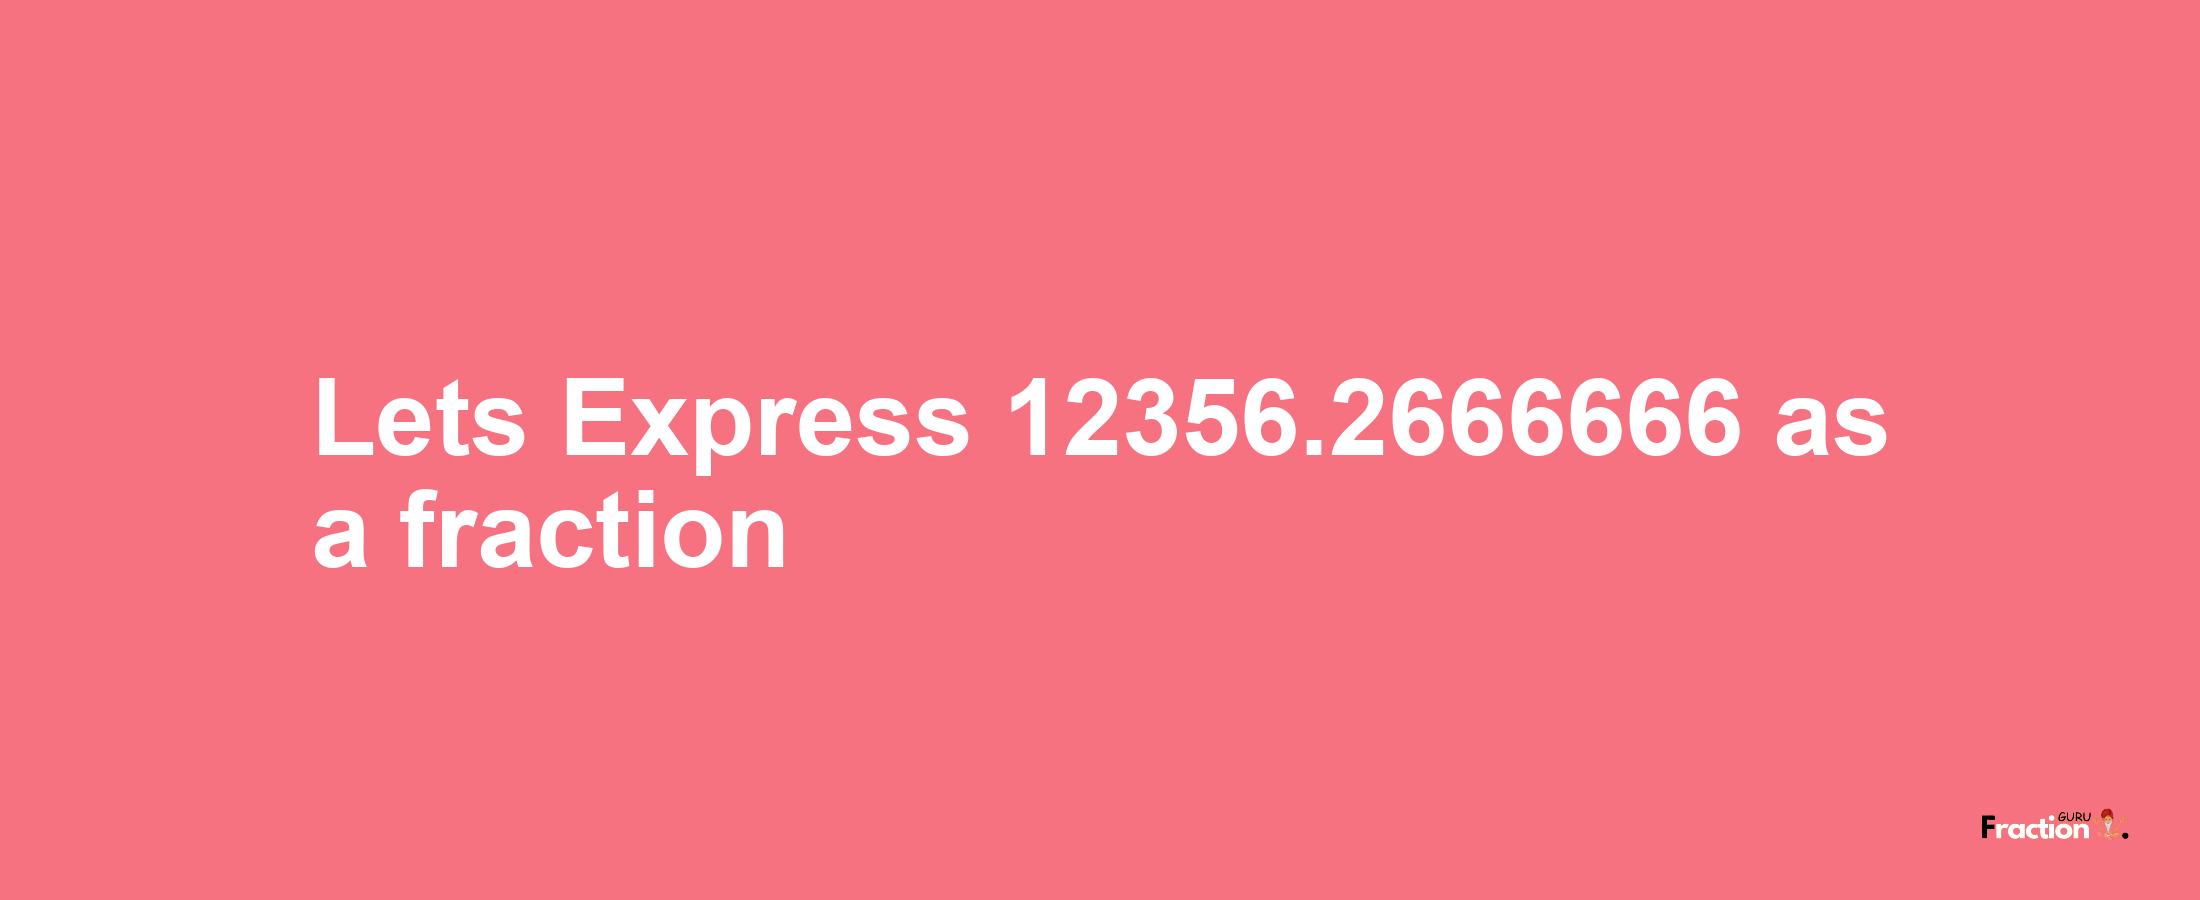 Lets Express 12356.2666666 as afraction